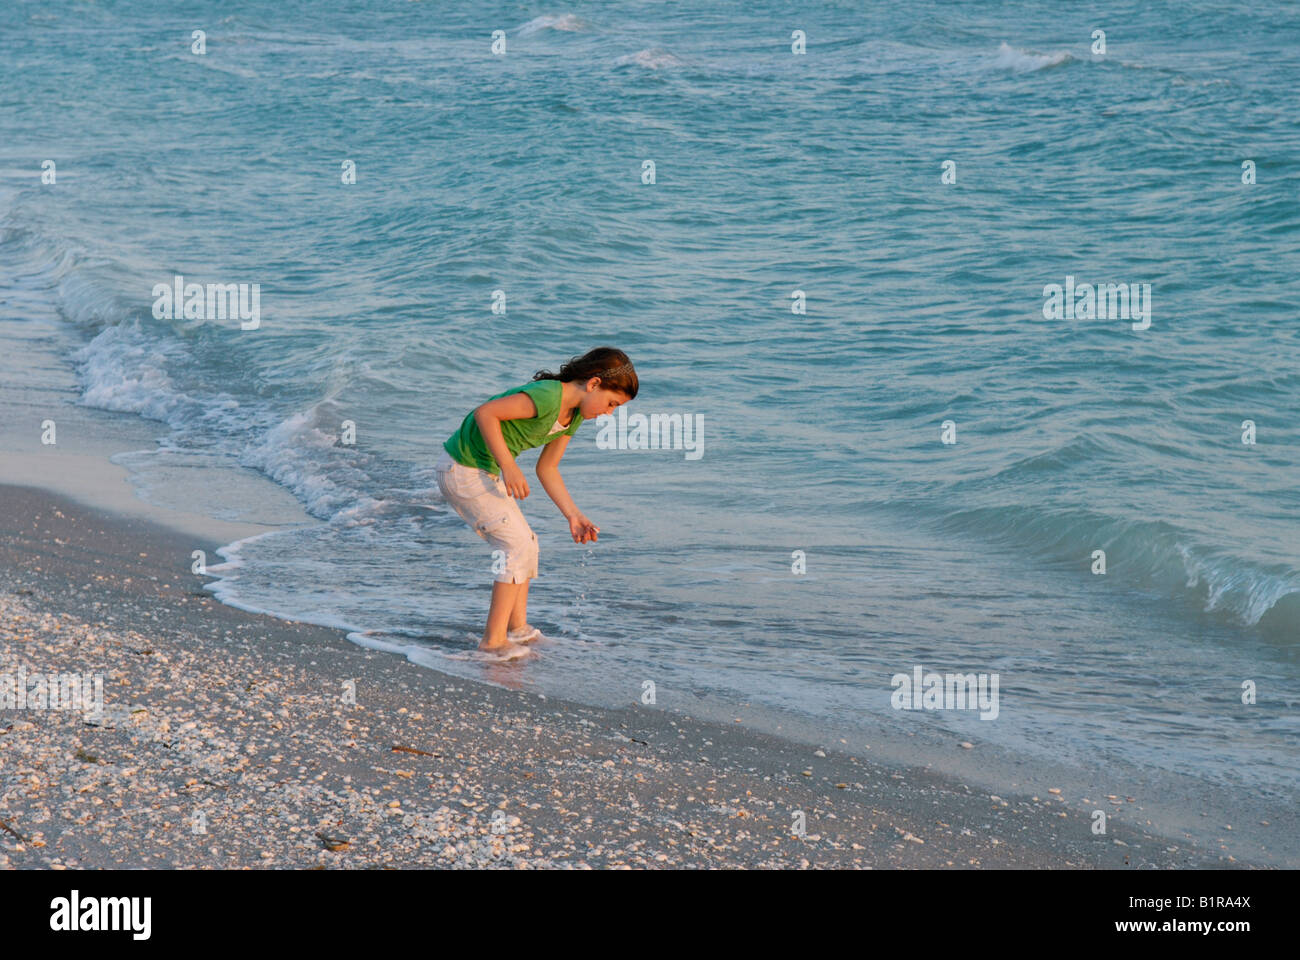 Young girl 9 10 years old collecting shells at water's edge Bowman's Beach Sanibel Island Florida at sunset Stock Photo